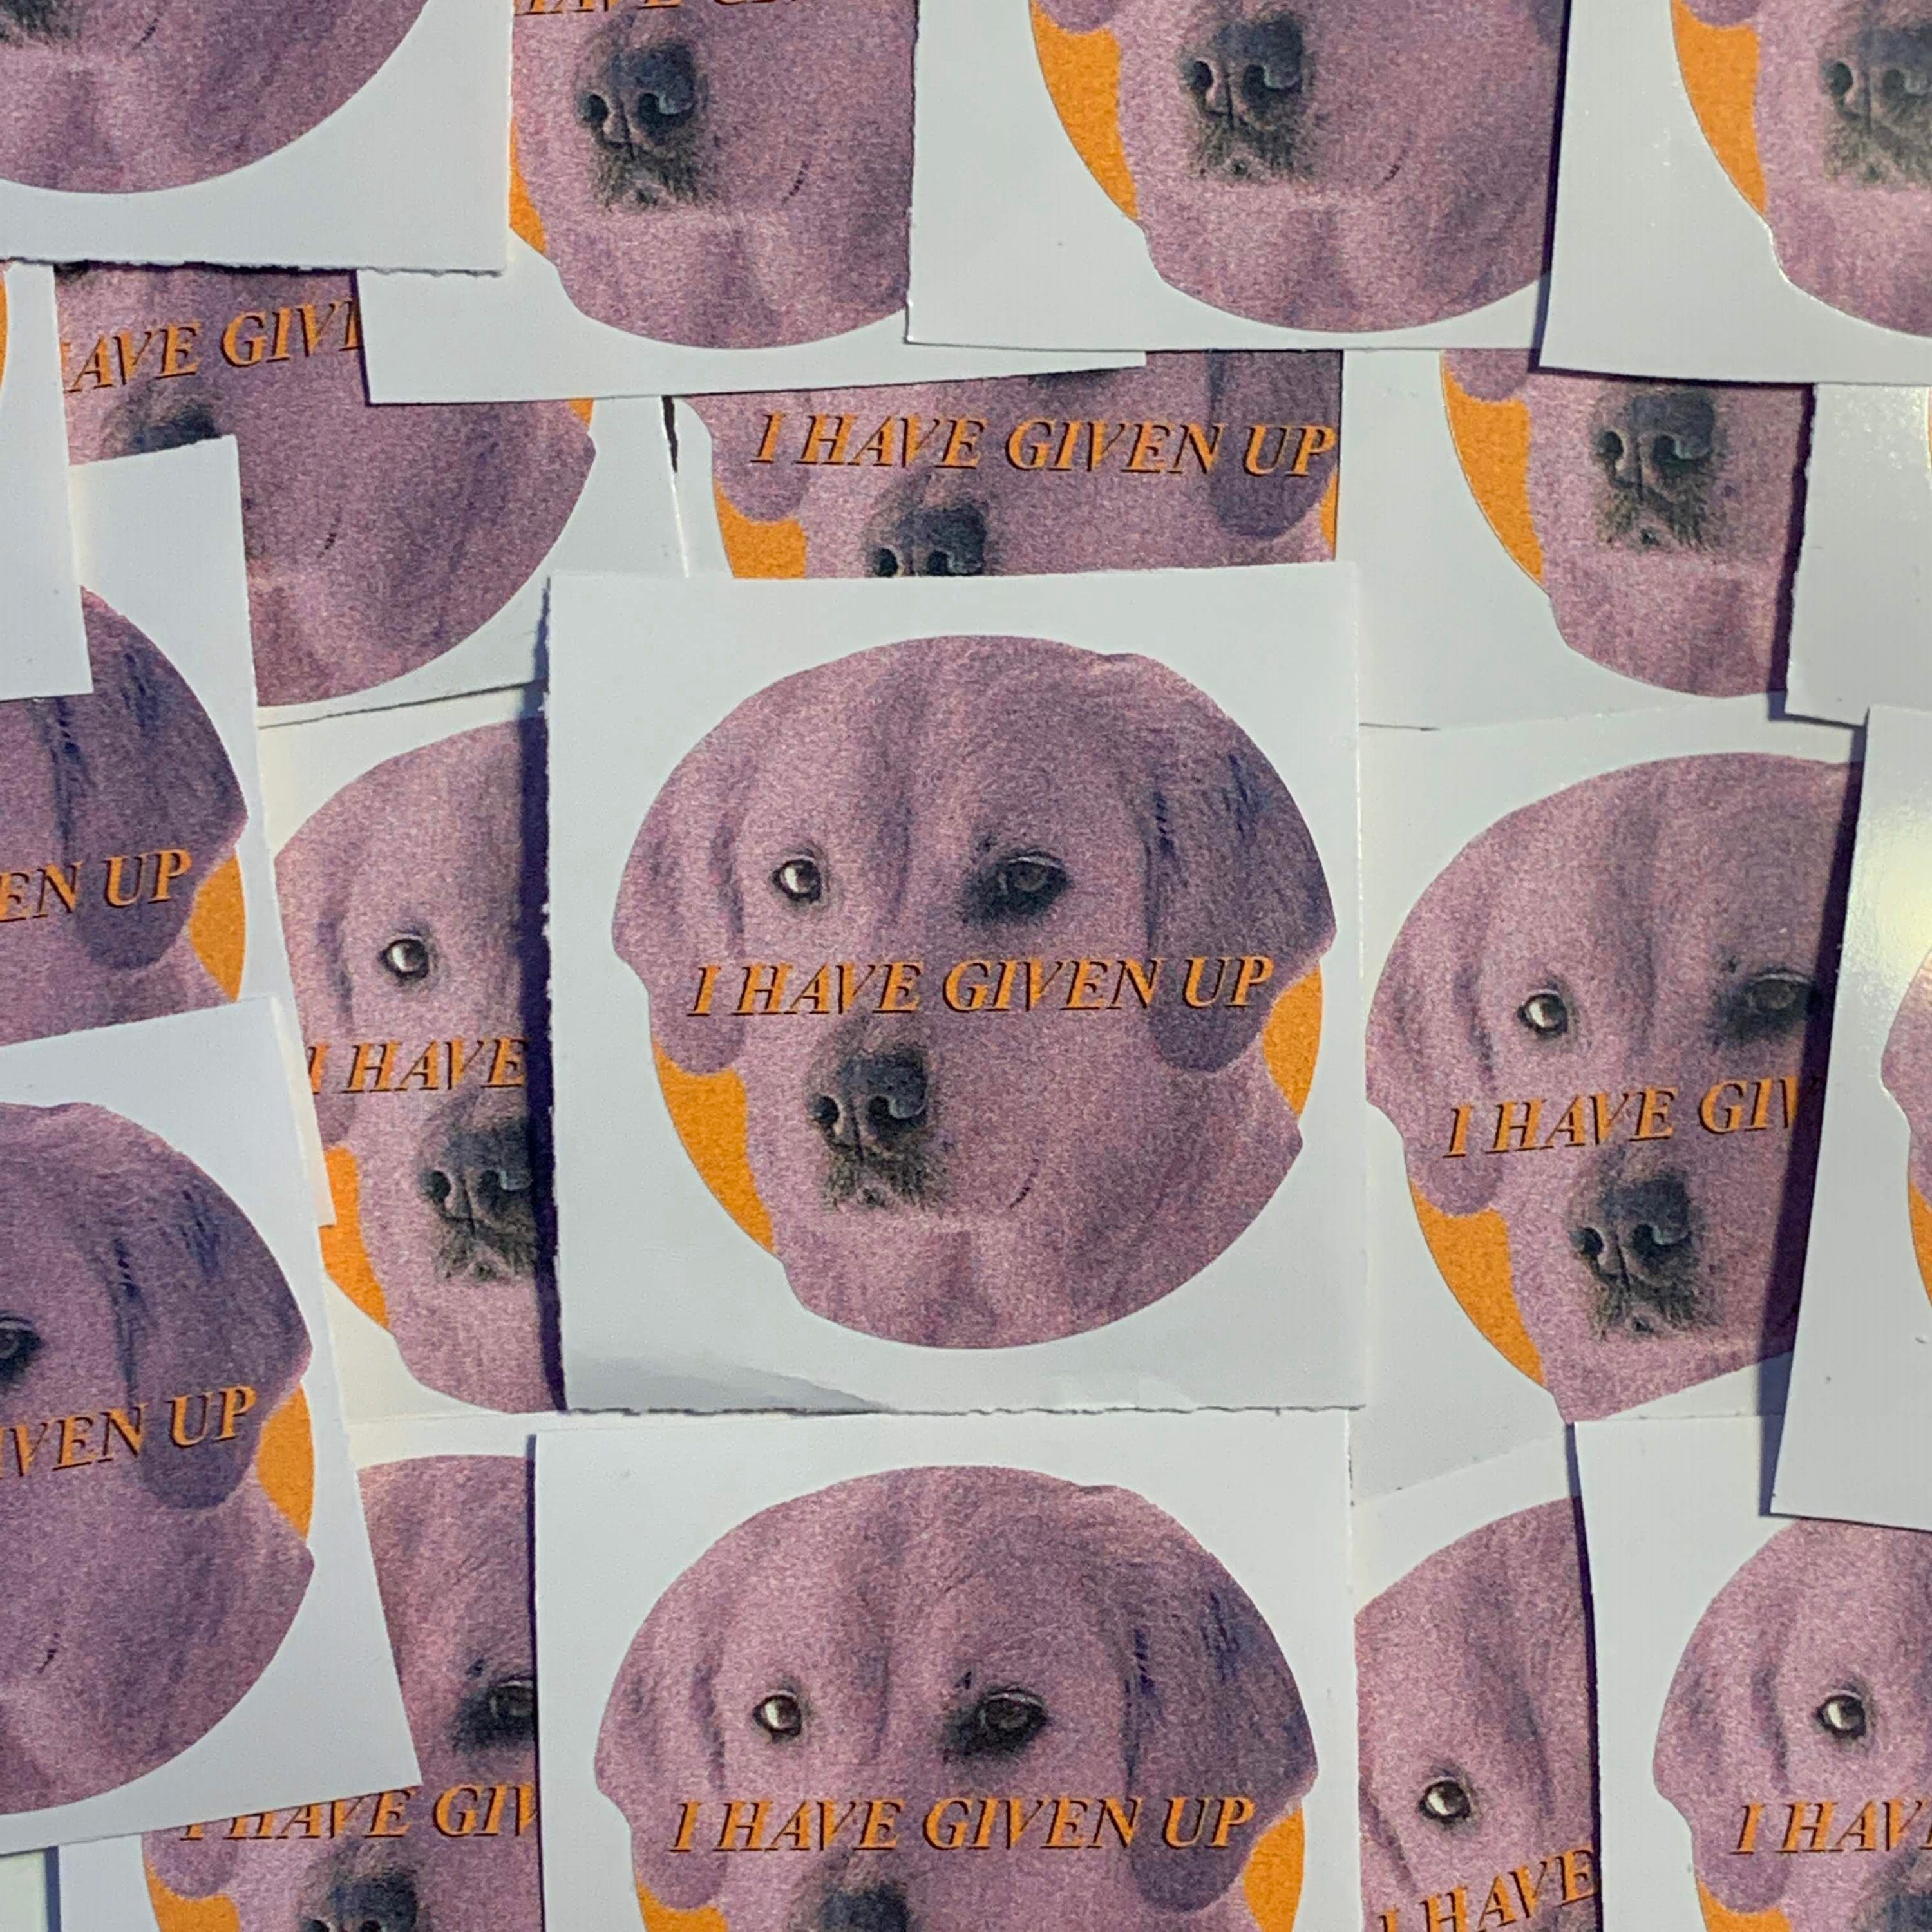 dogecore stickers variety pack no. 2137